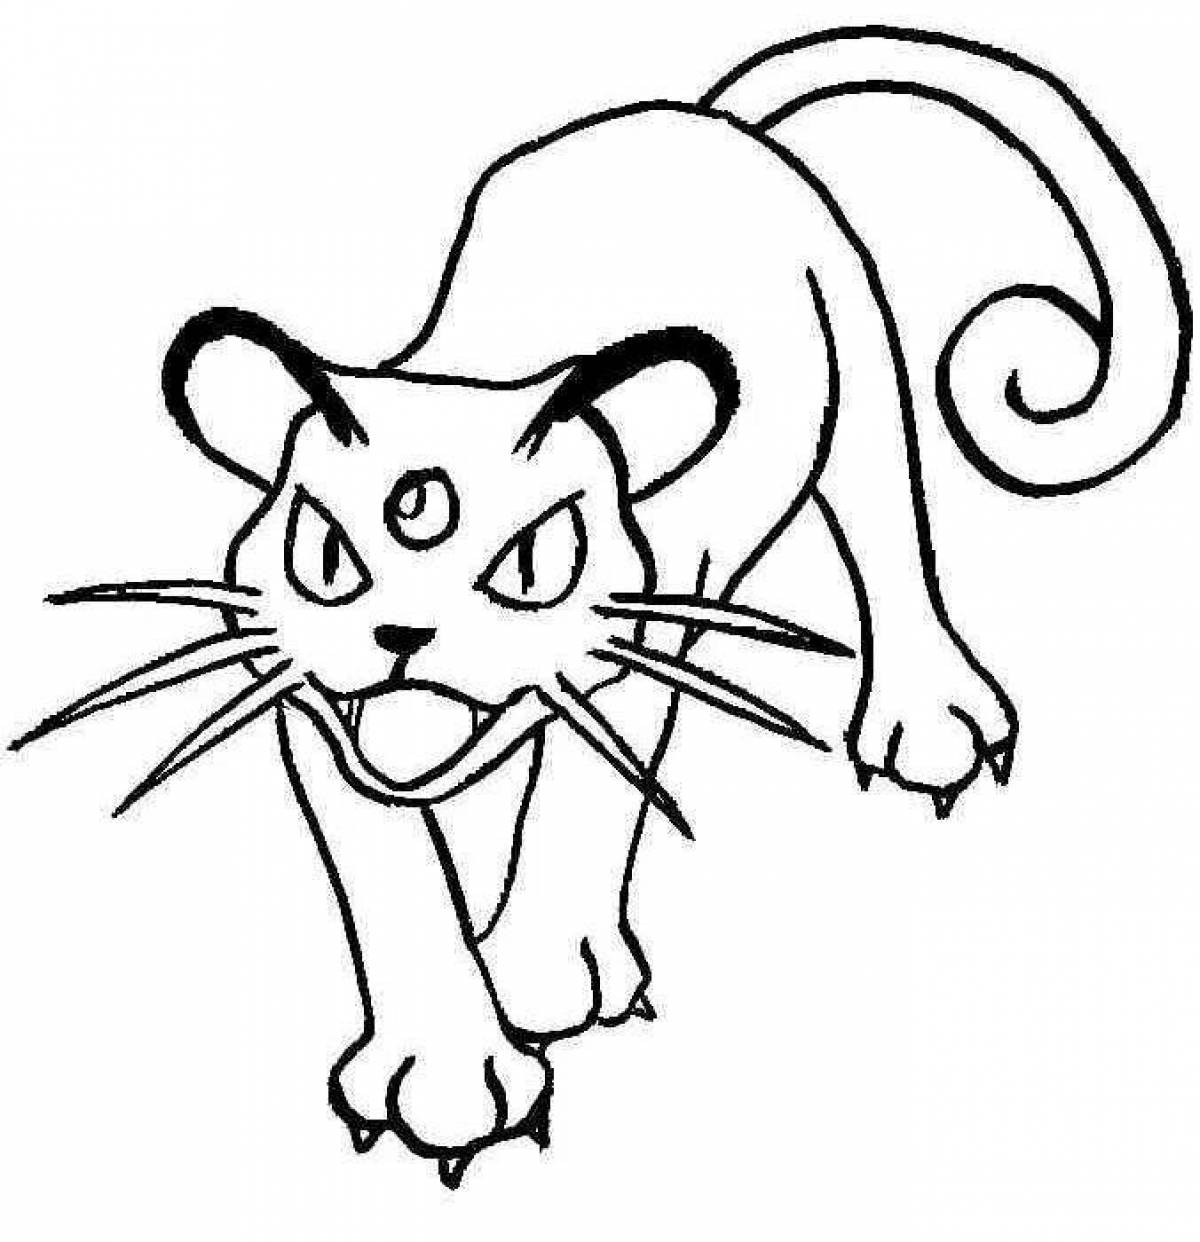 Glowing meowth coloring page